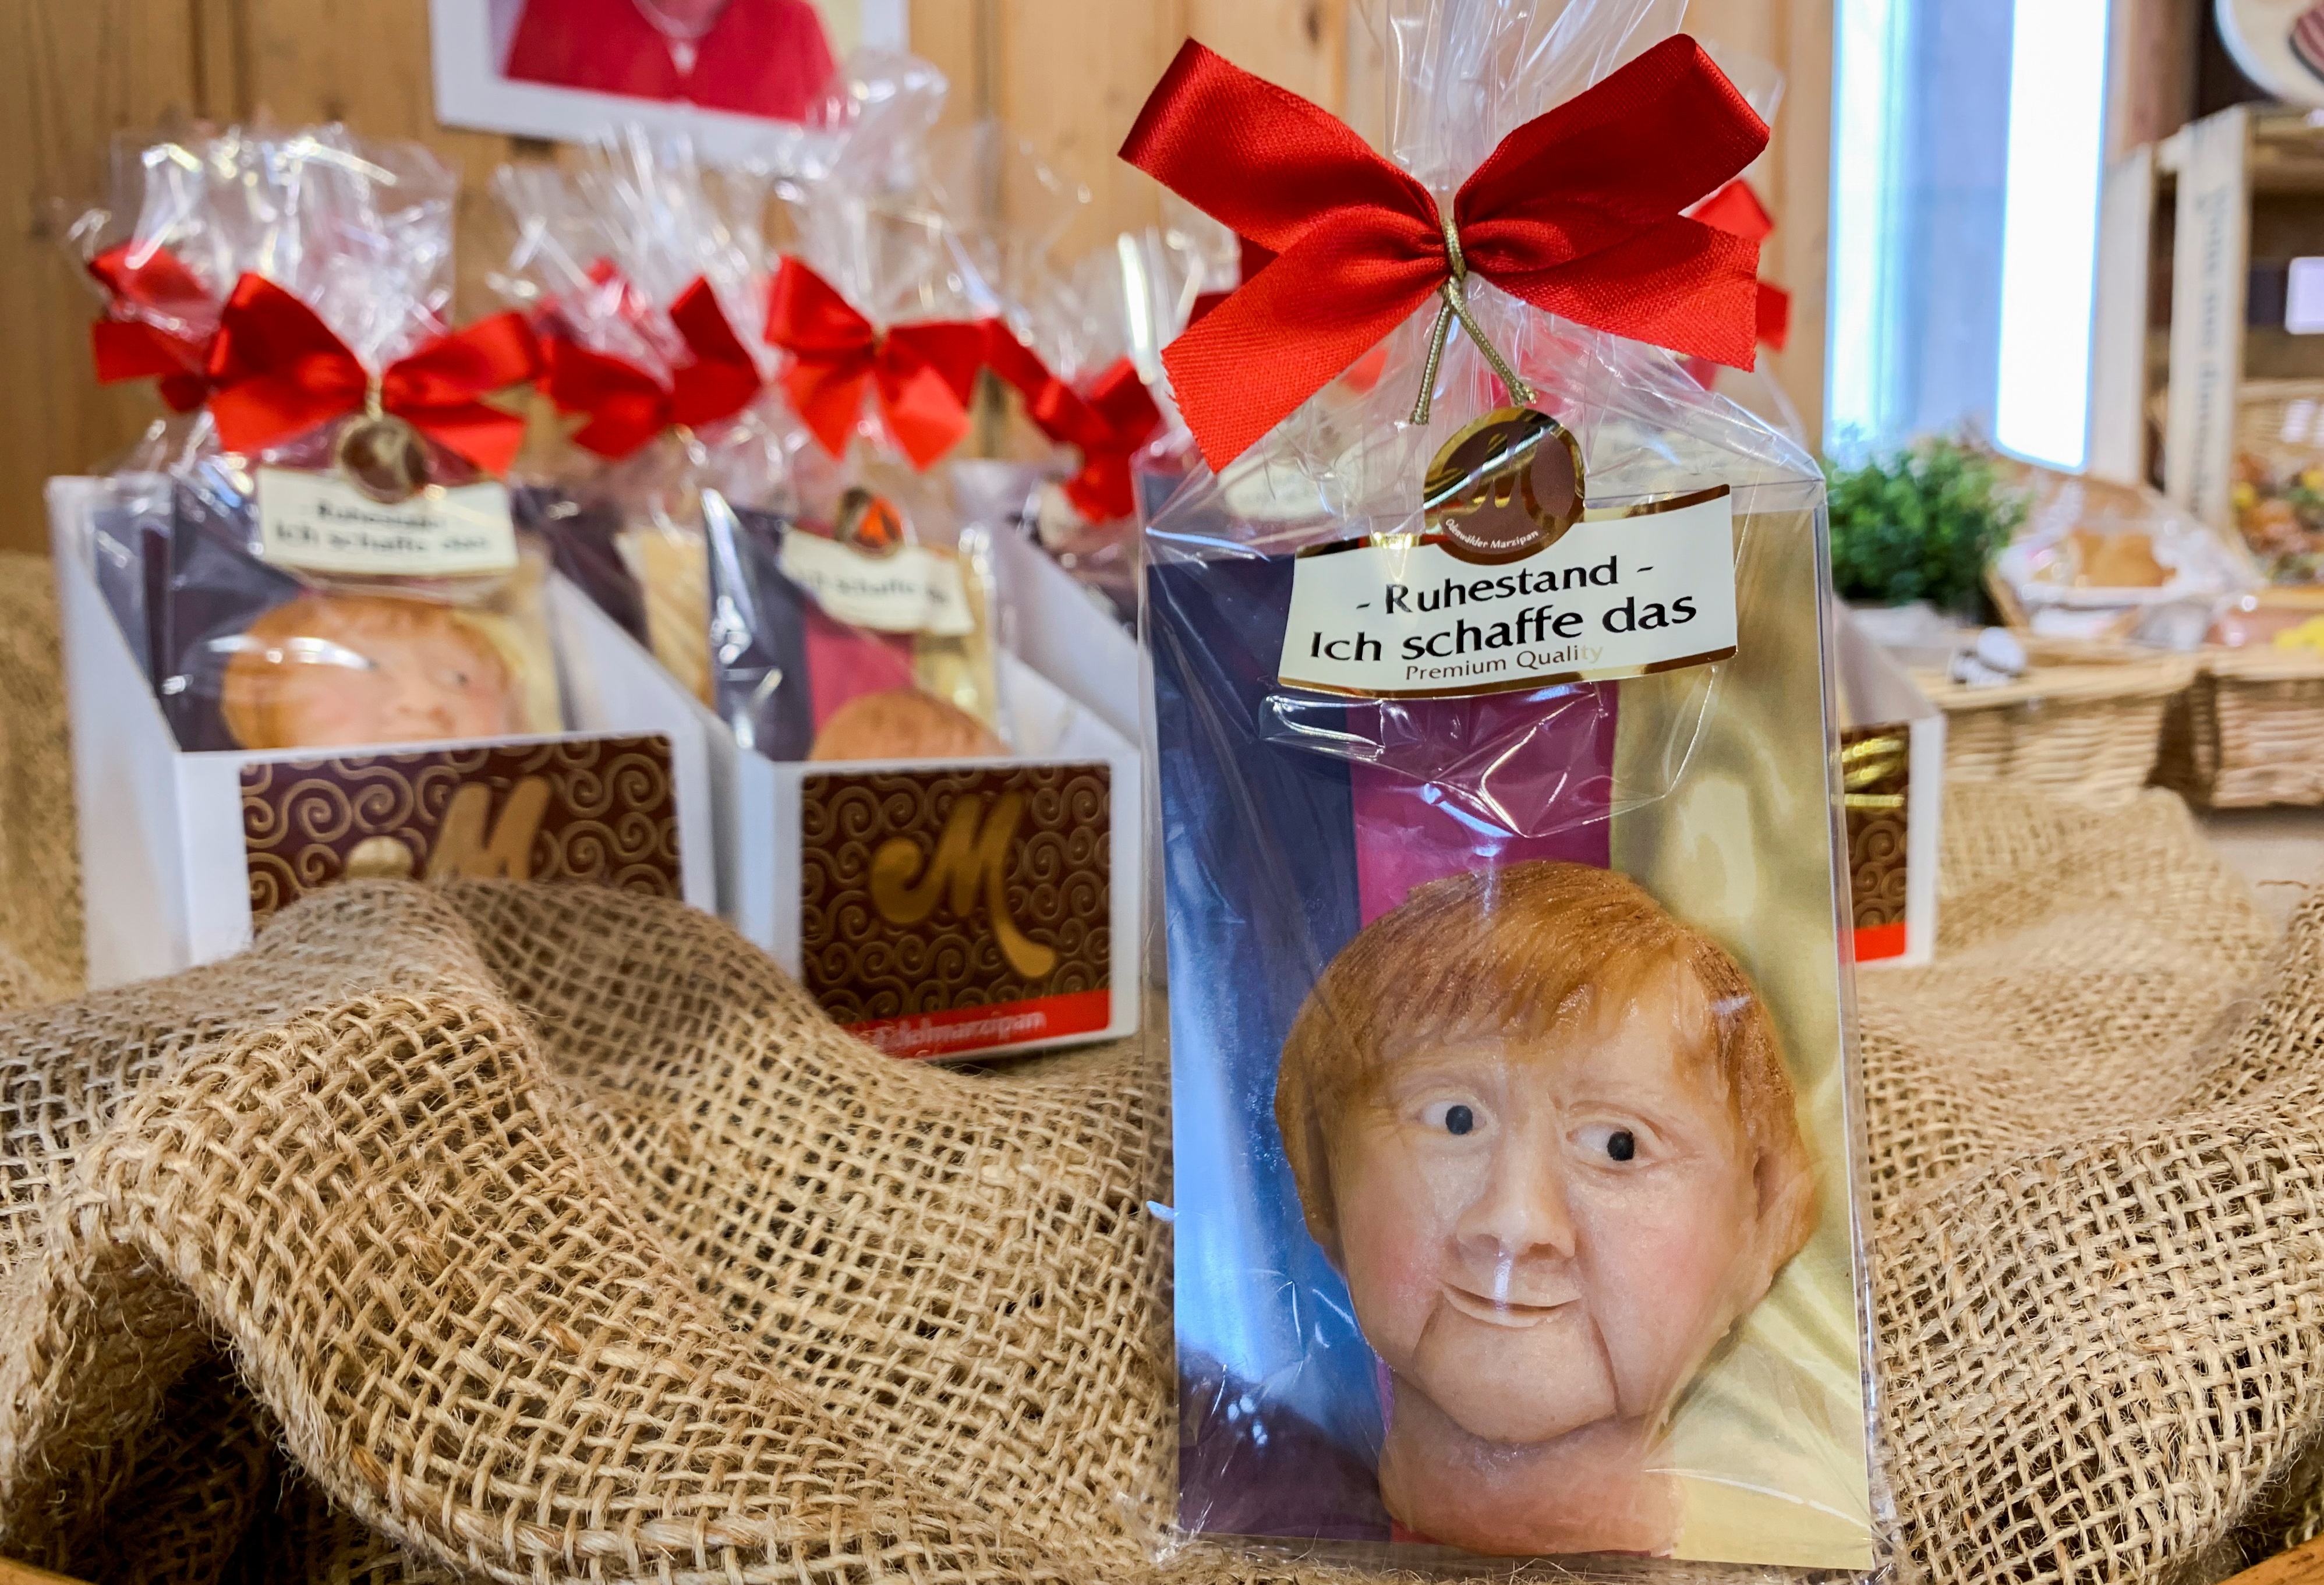 Marzipan cookies depicting German Chancellor Angela Merkel made by a German confectioner ahead of the September 26 elections, are displayed in Weilbach, Germany, September 14, 2021. REUTERS/Annkathrin Weis